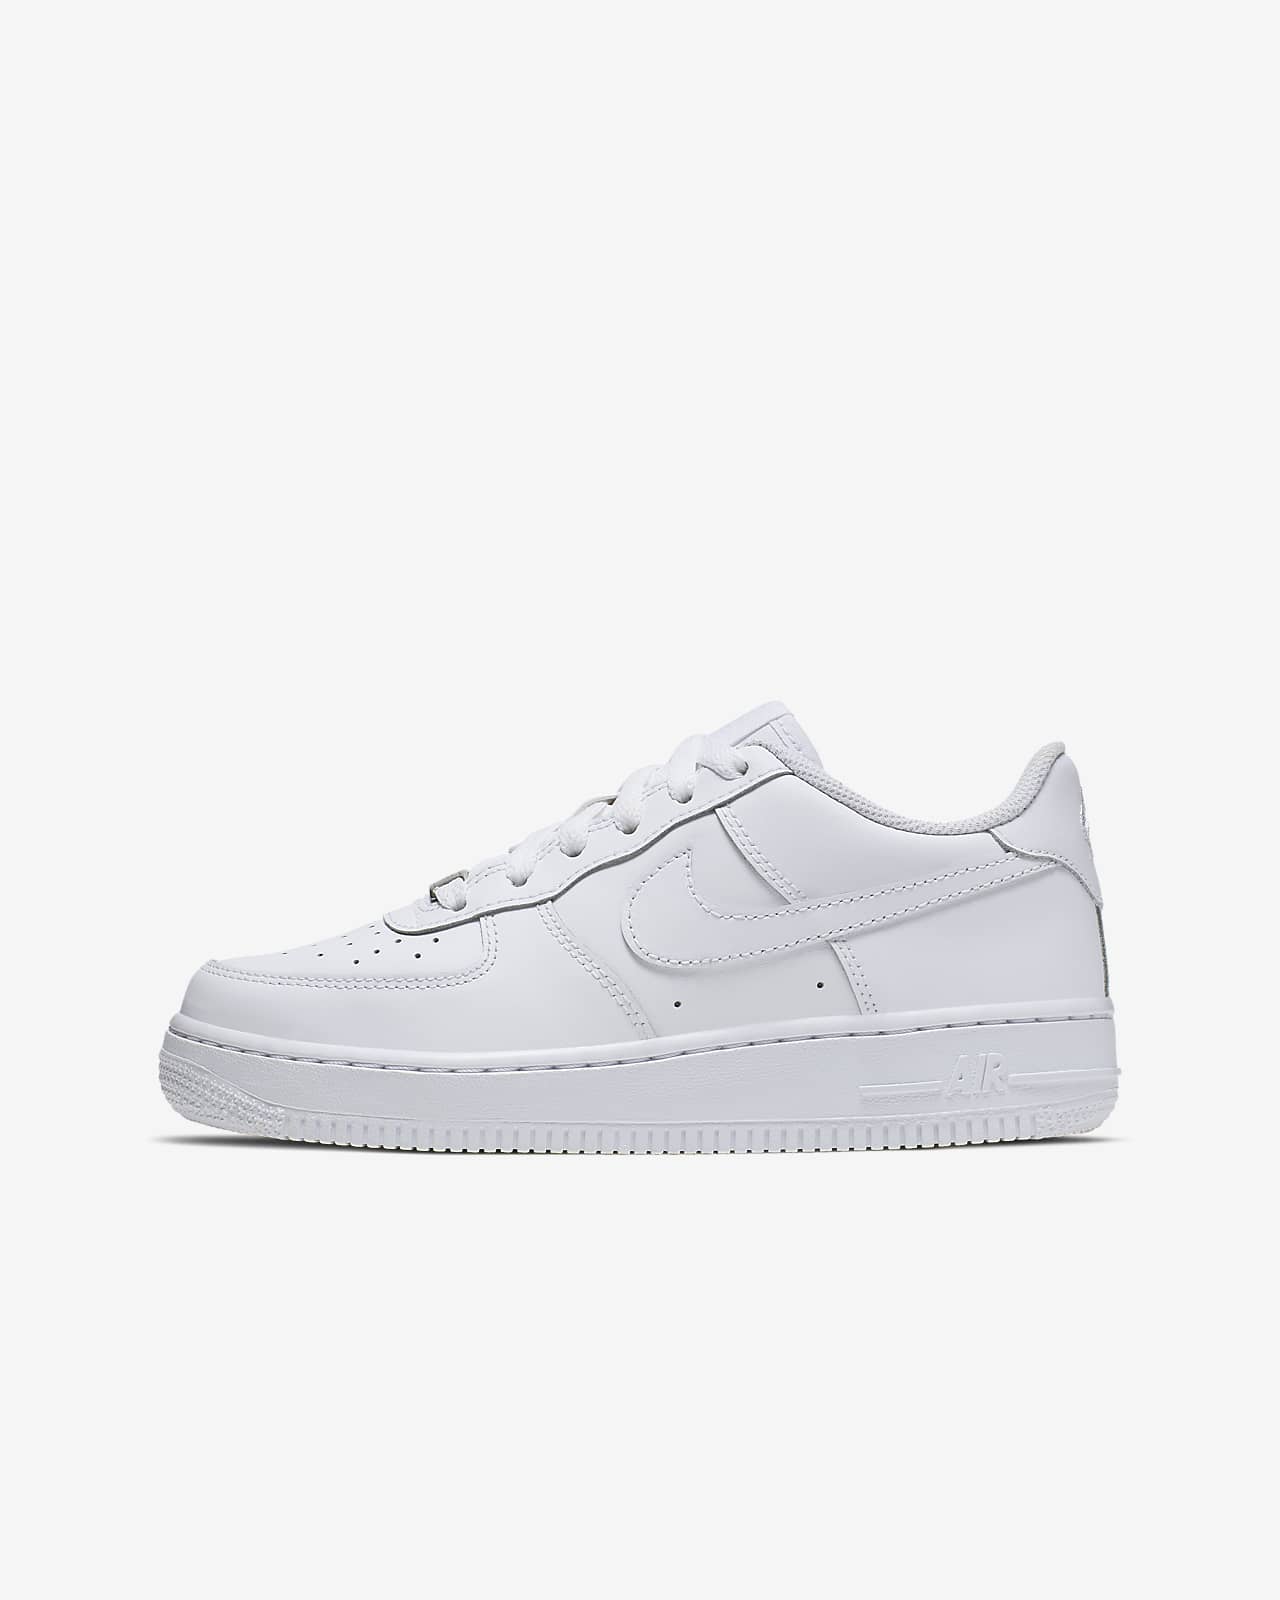 nike air force 1 youth size 5